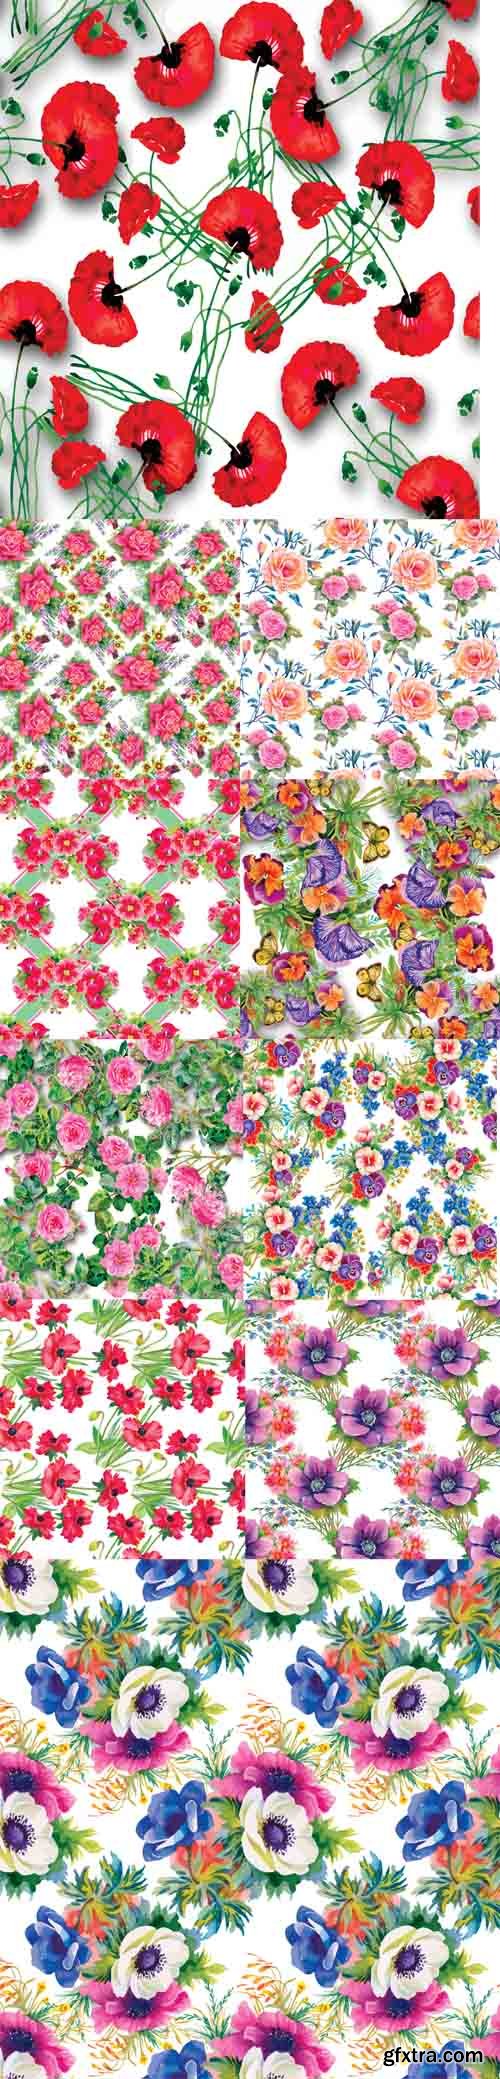 10 Seamless Patterns with Beautiful Flowers Watercolor Illustrations